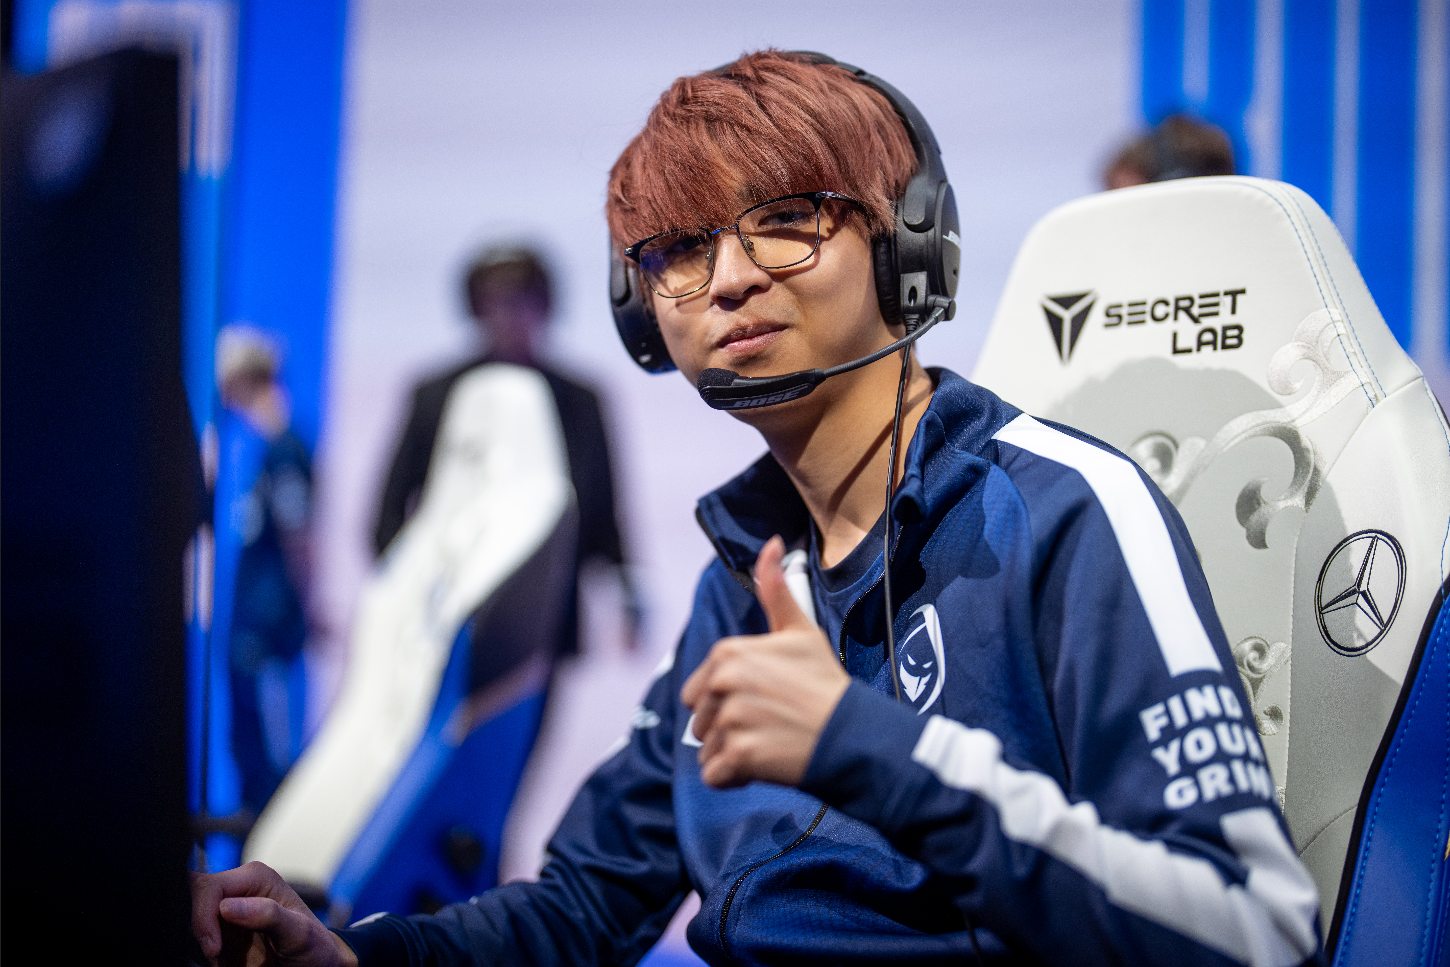 Hans Sama: A French League of Legends Star